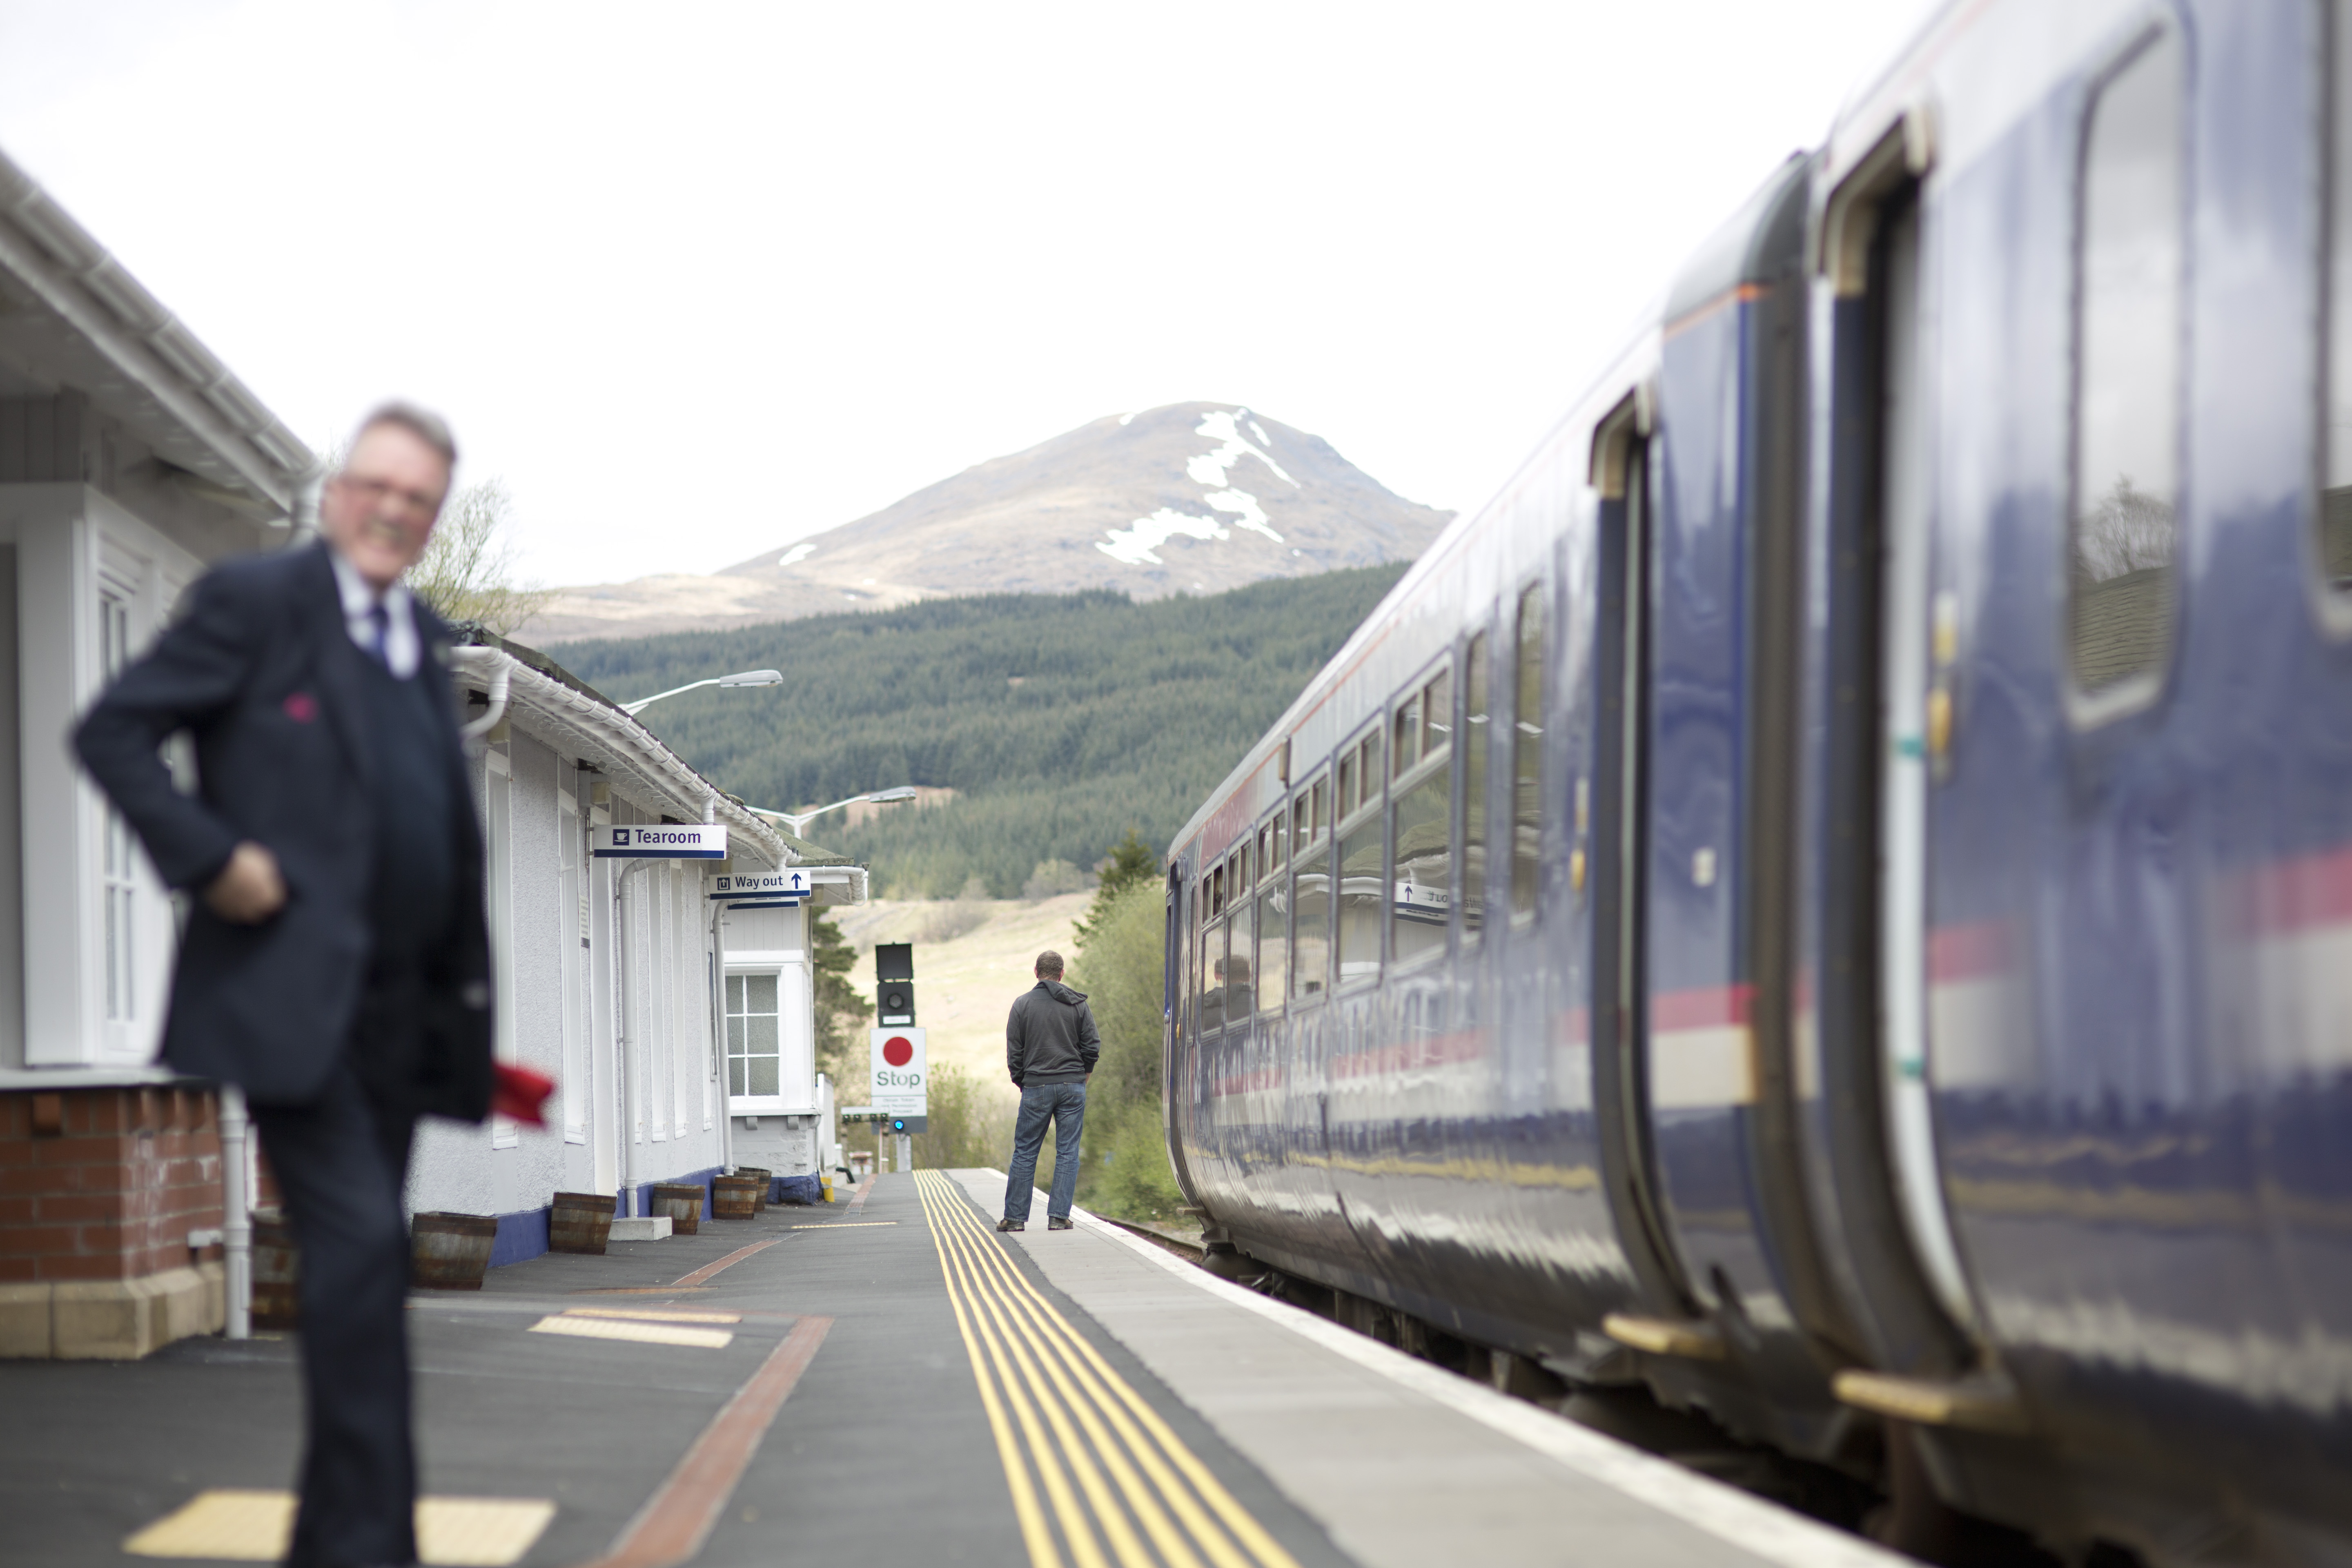 Train in the Scottish Highlands with conductor at the station